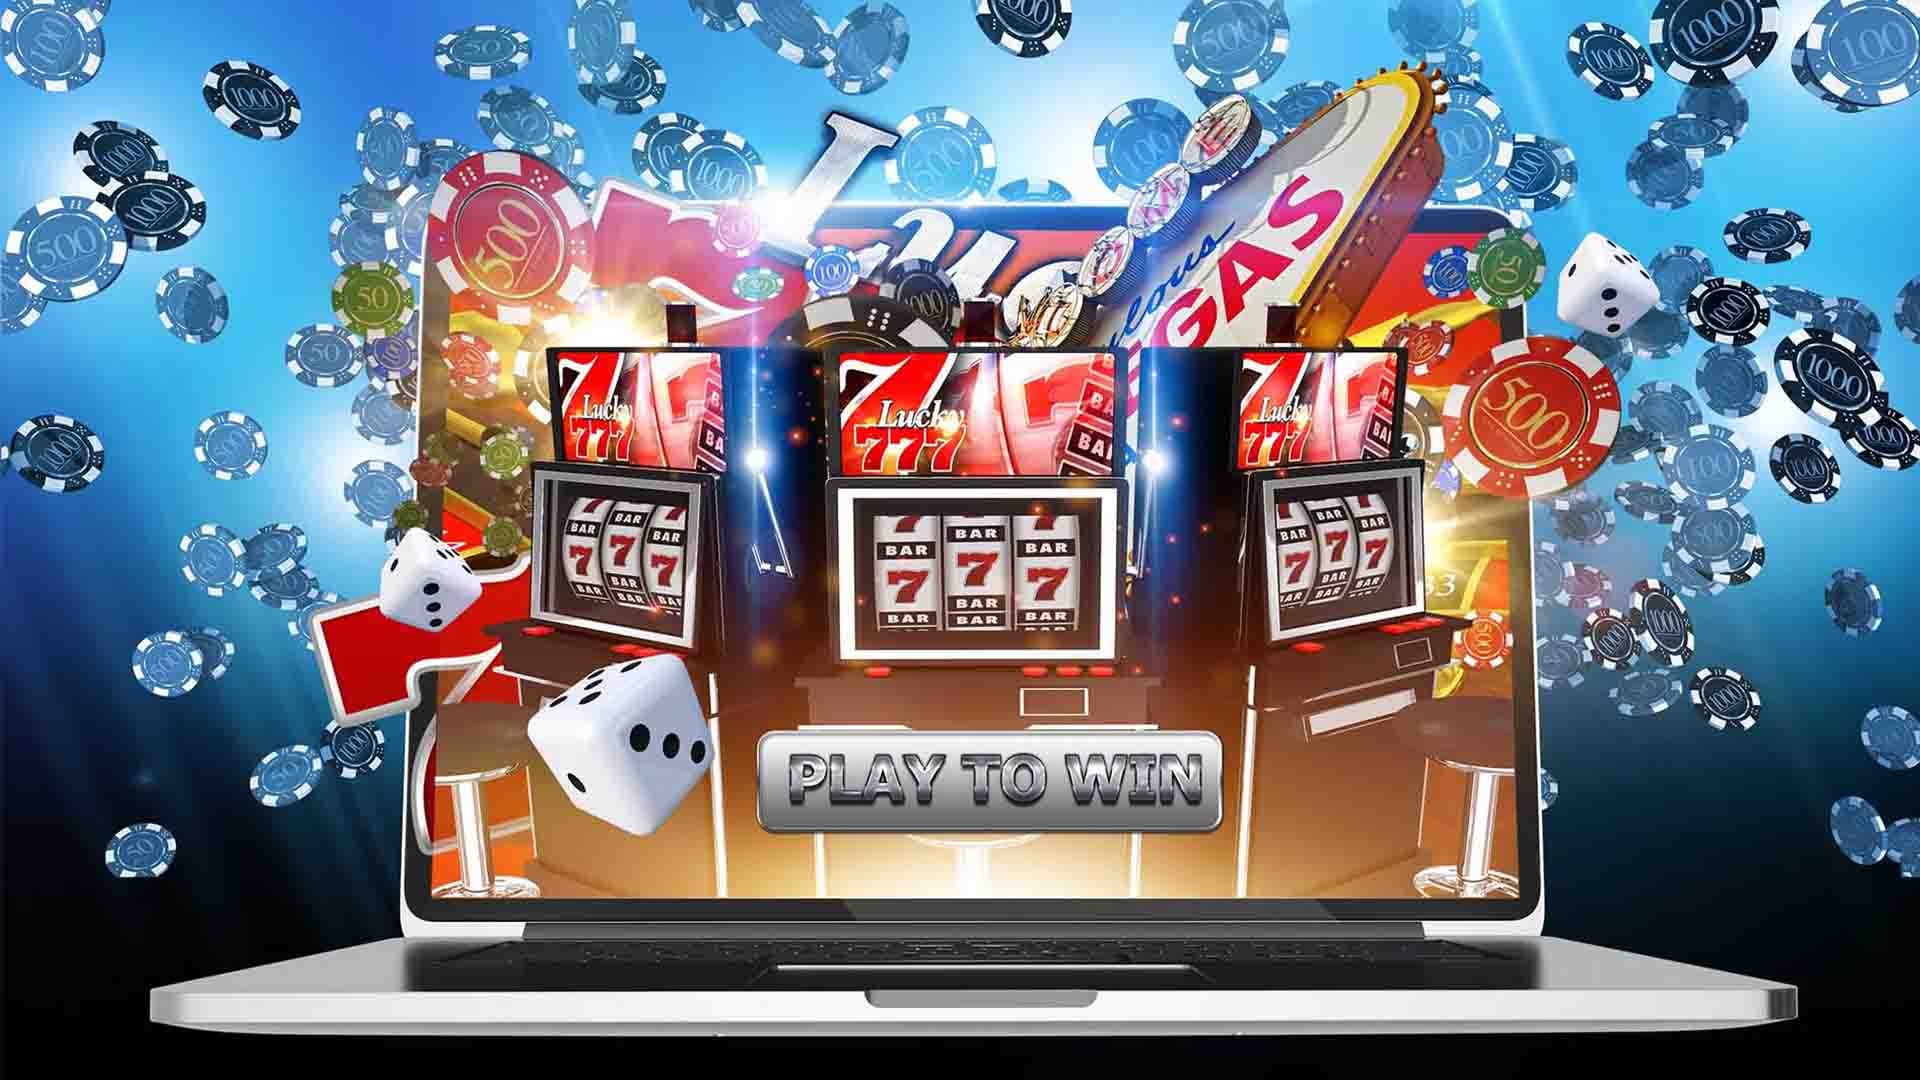 Is it ok to play games or do gambling in an online casino?